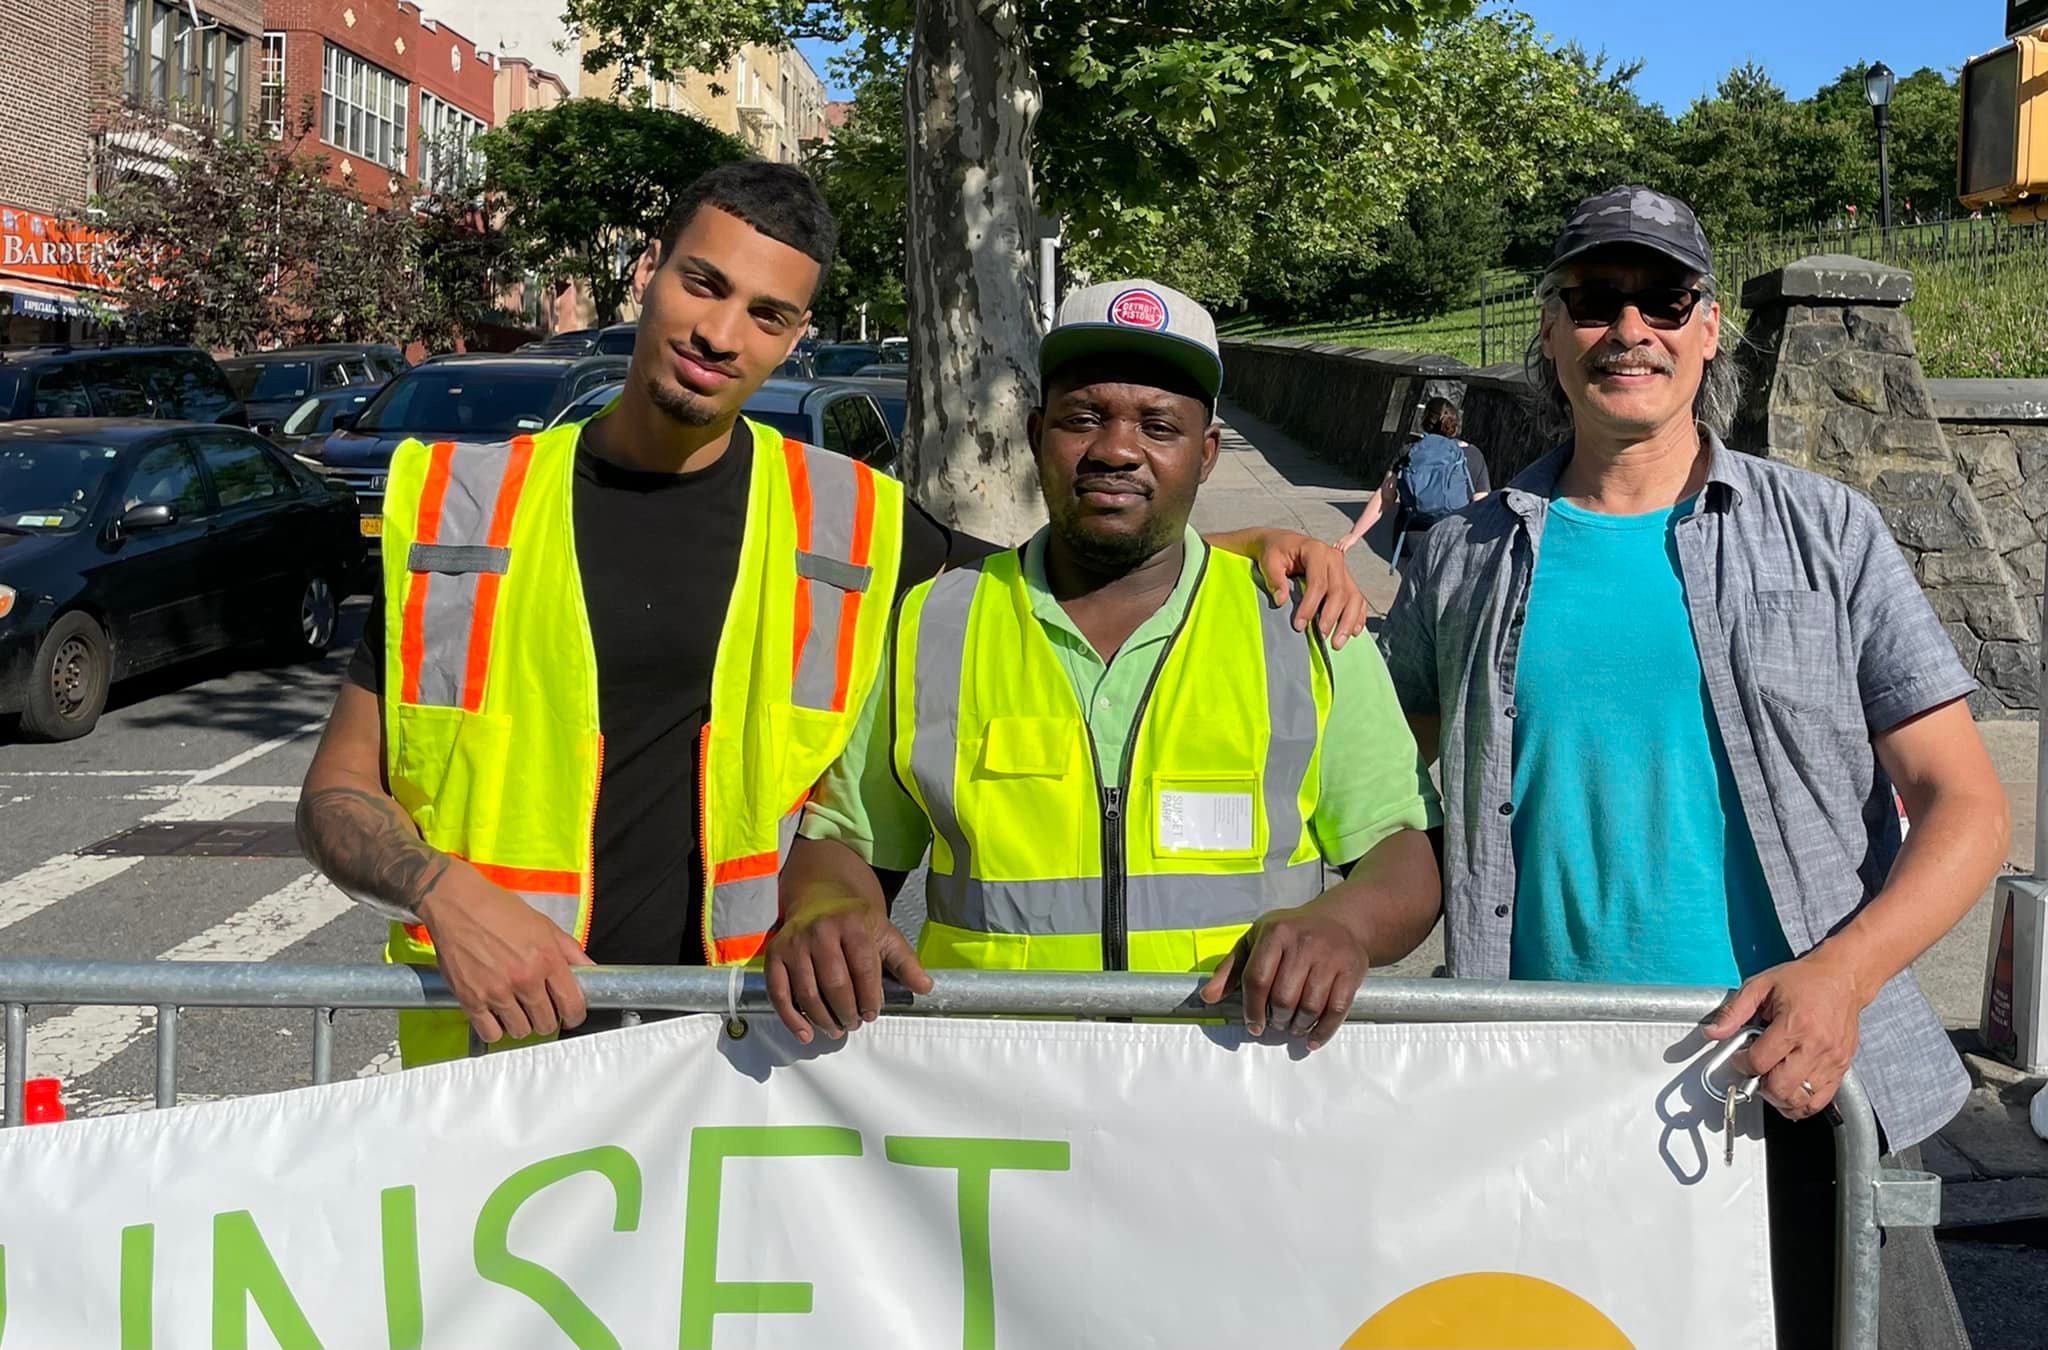 Three men in casual attire, two wearing high-visibility vests, standing outdoors holding a banner with the word "unset" and a circular logo. the background features lush greenery and a clear blue sky.